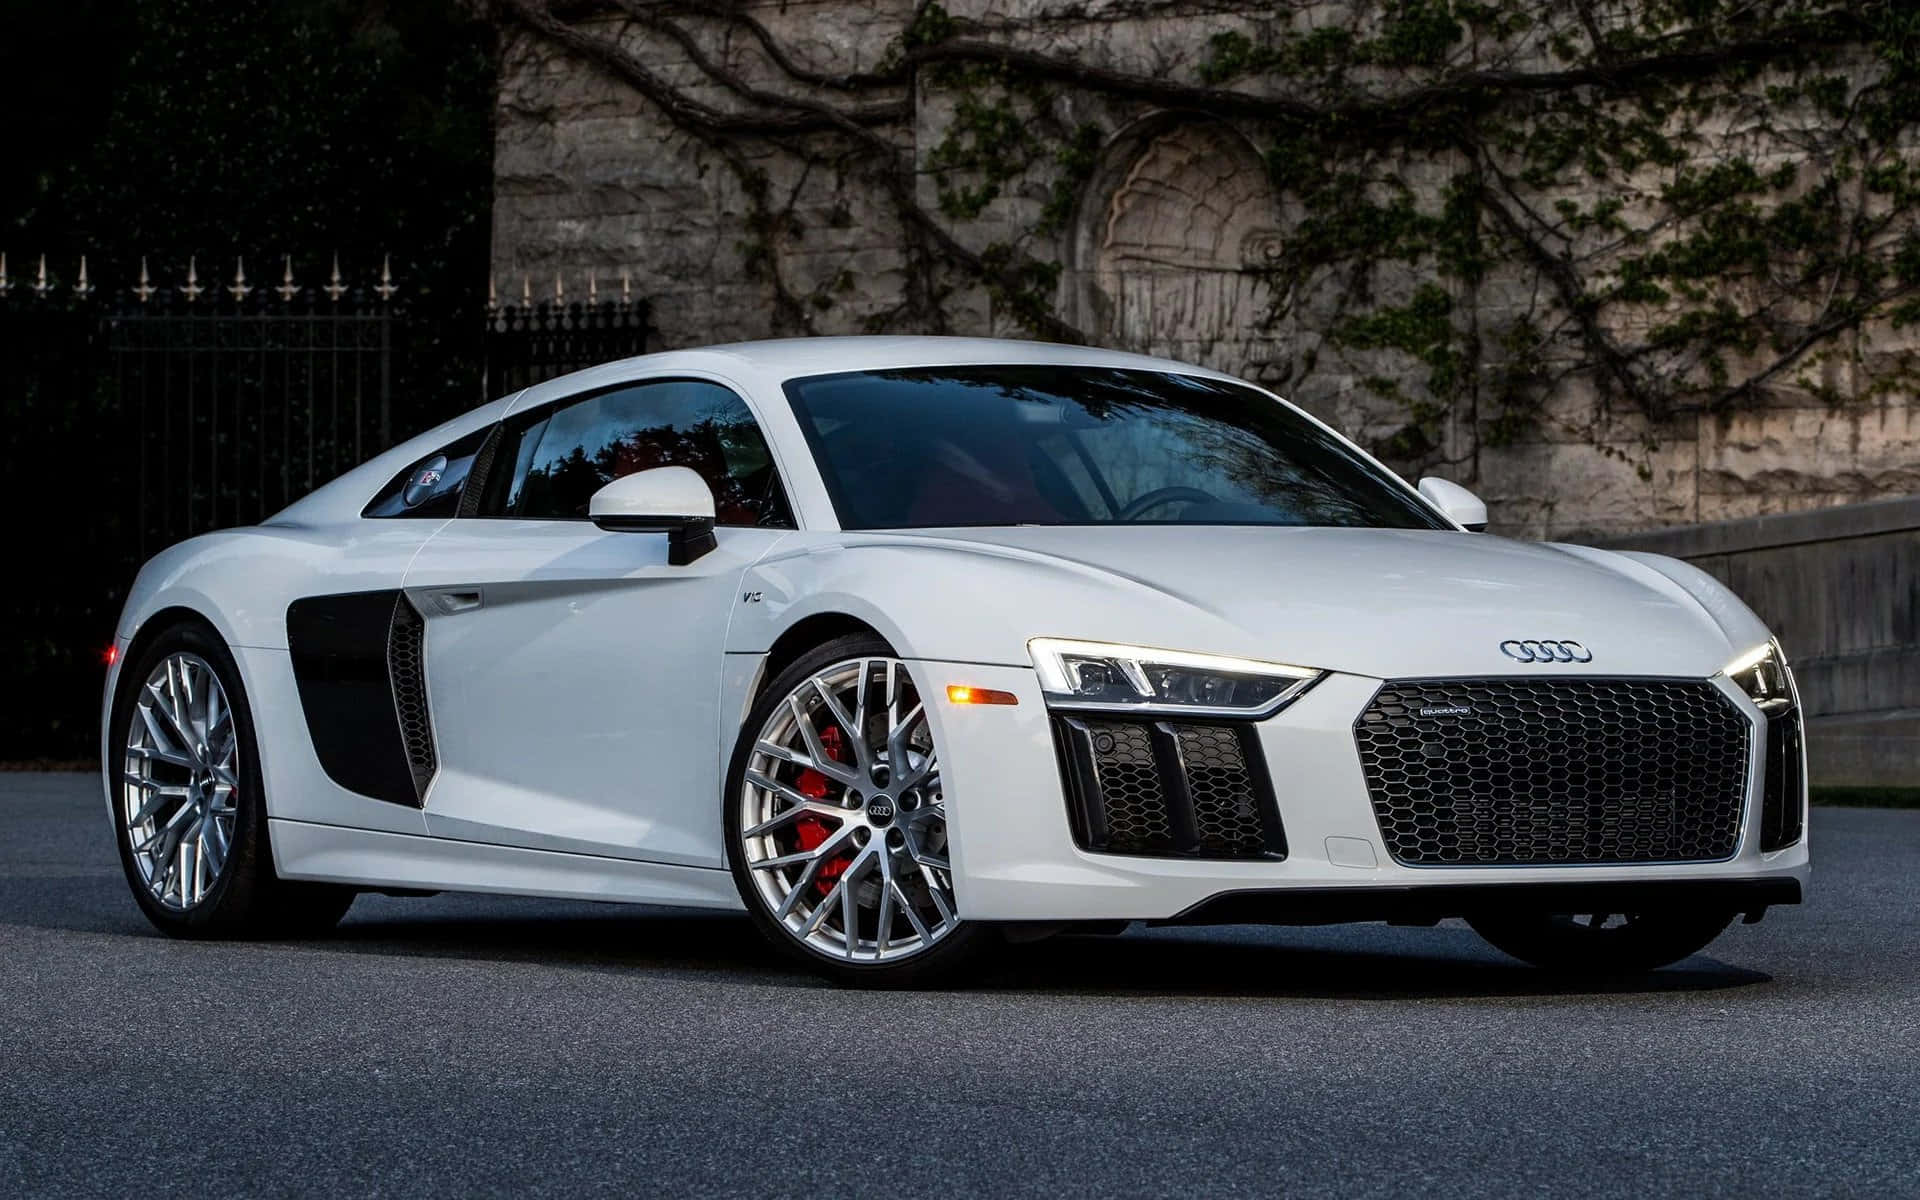 Feel the Power Behind the Wheel of an Audi R8